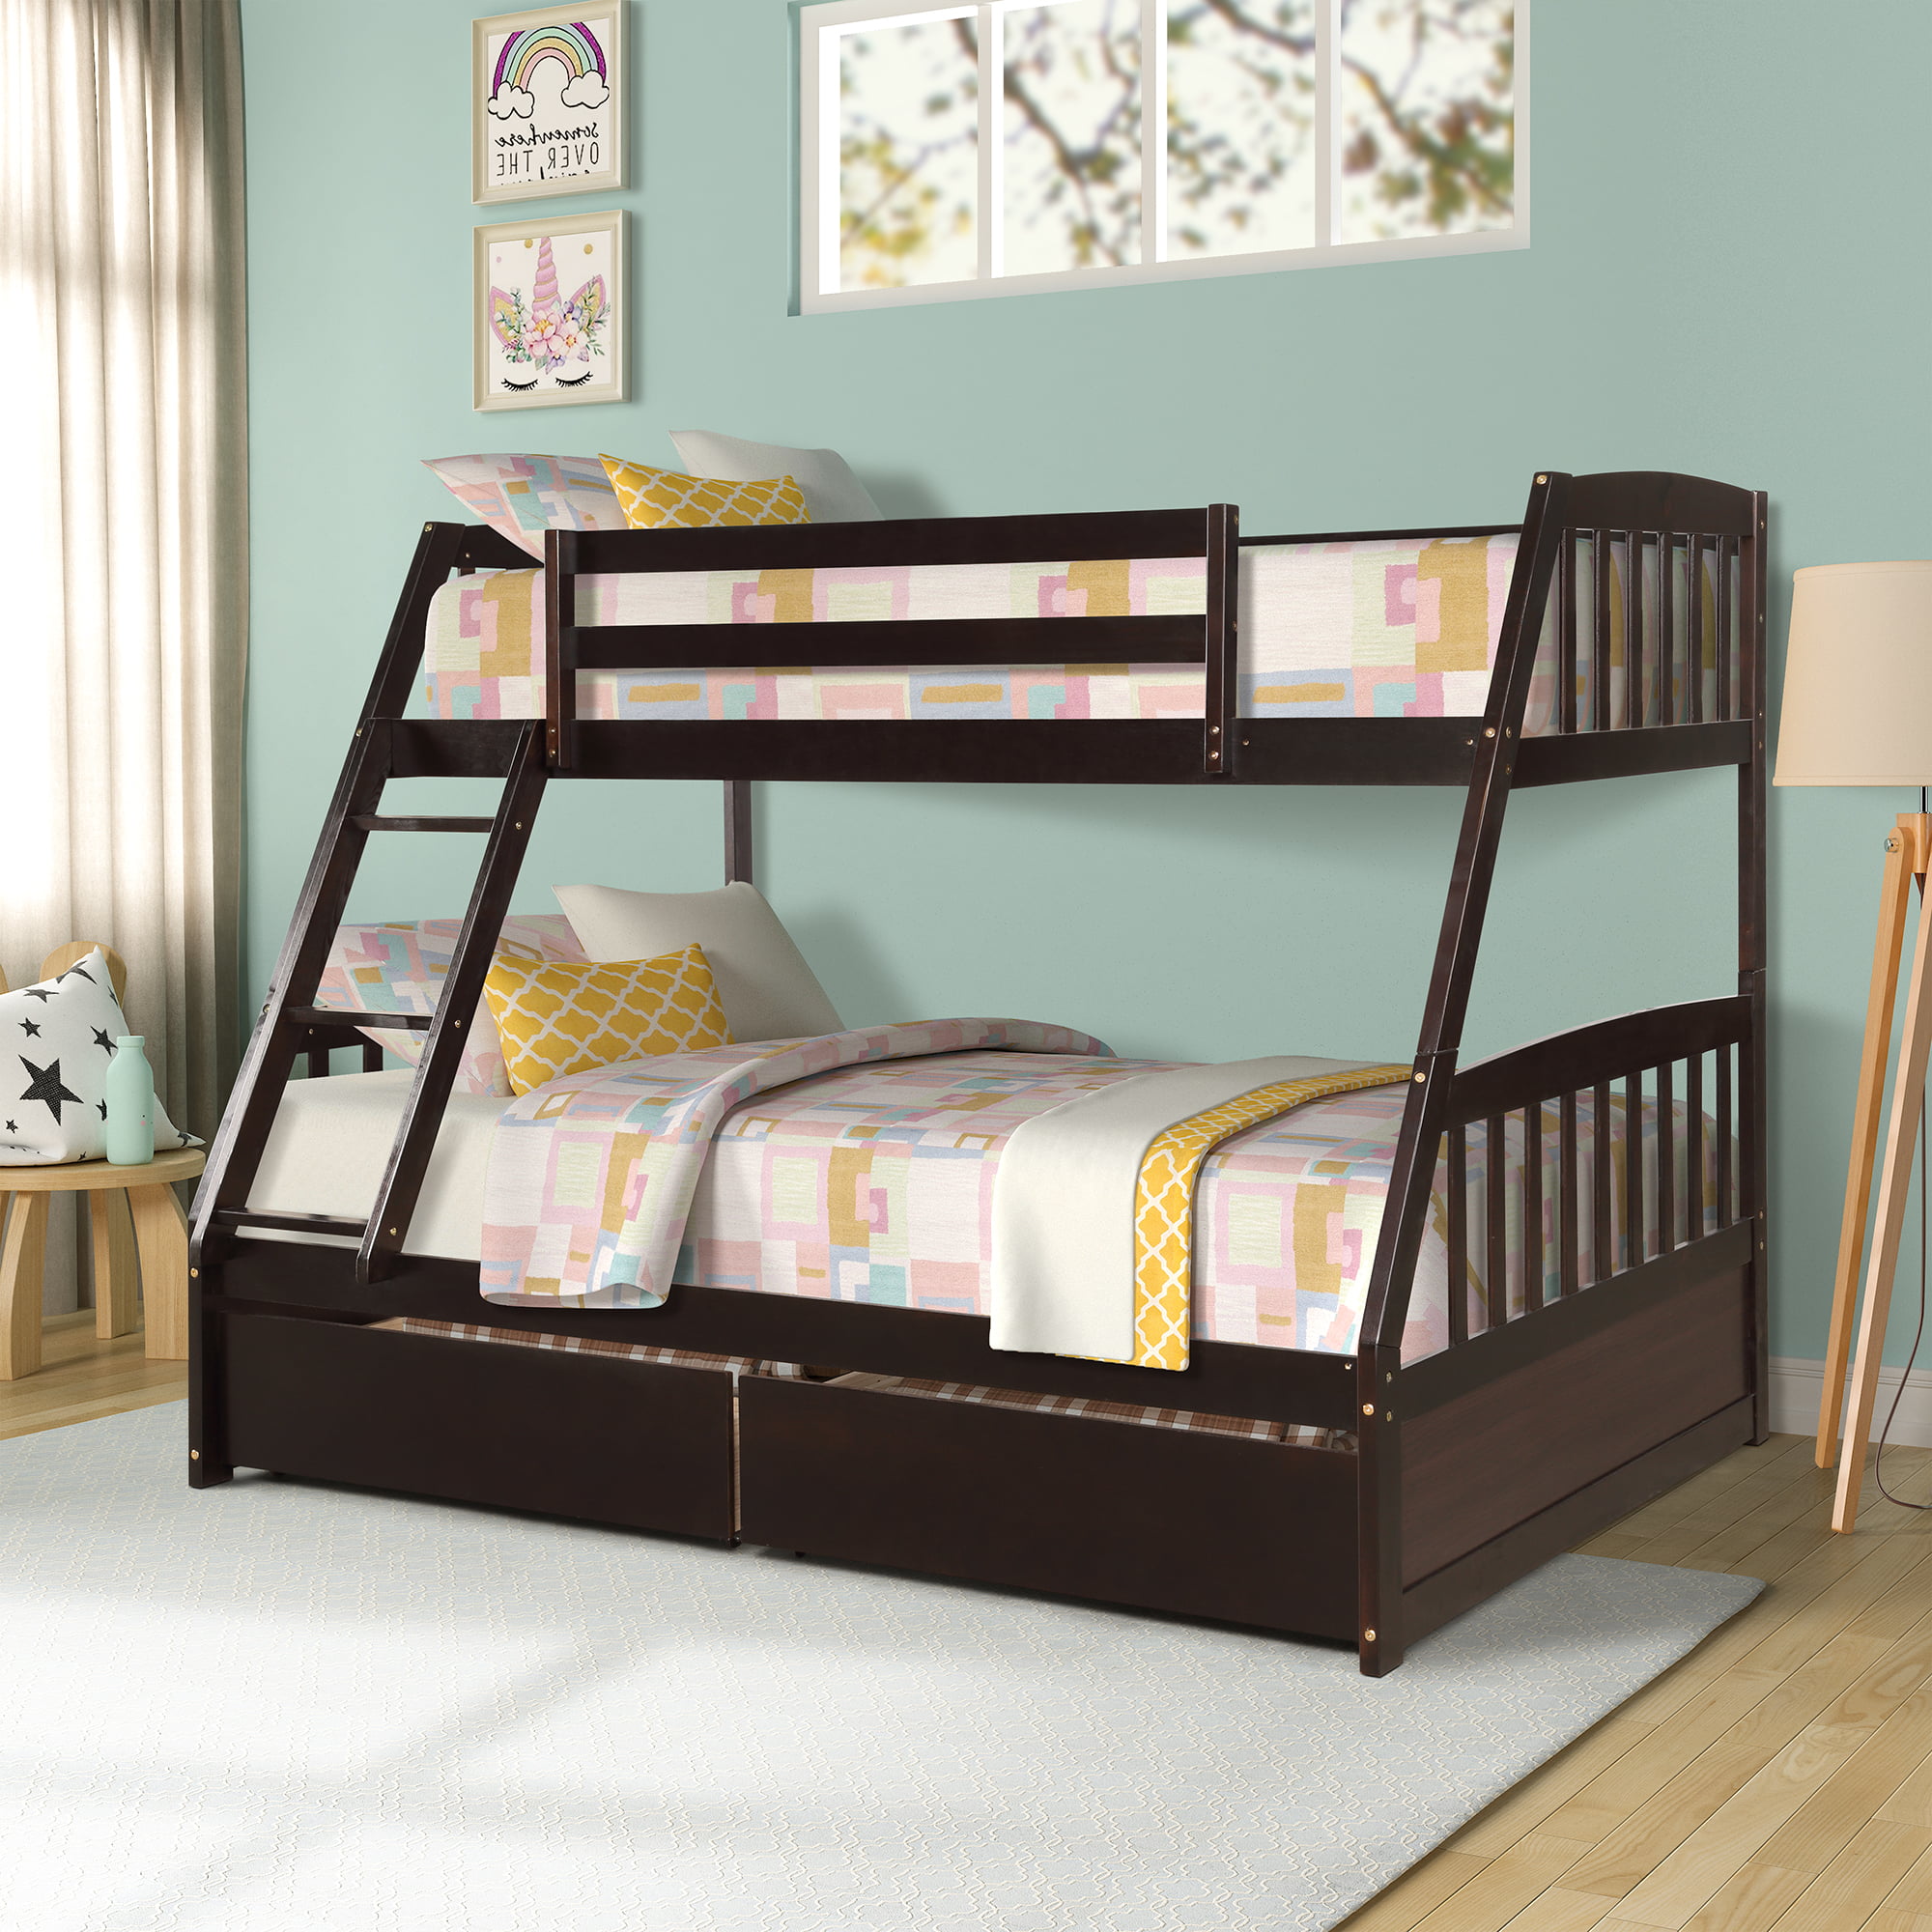 Solid Wood Bunk Bed Frame, Twin Over Full Bunk Bed With Storage Drawers